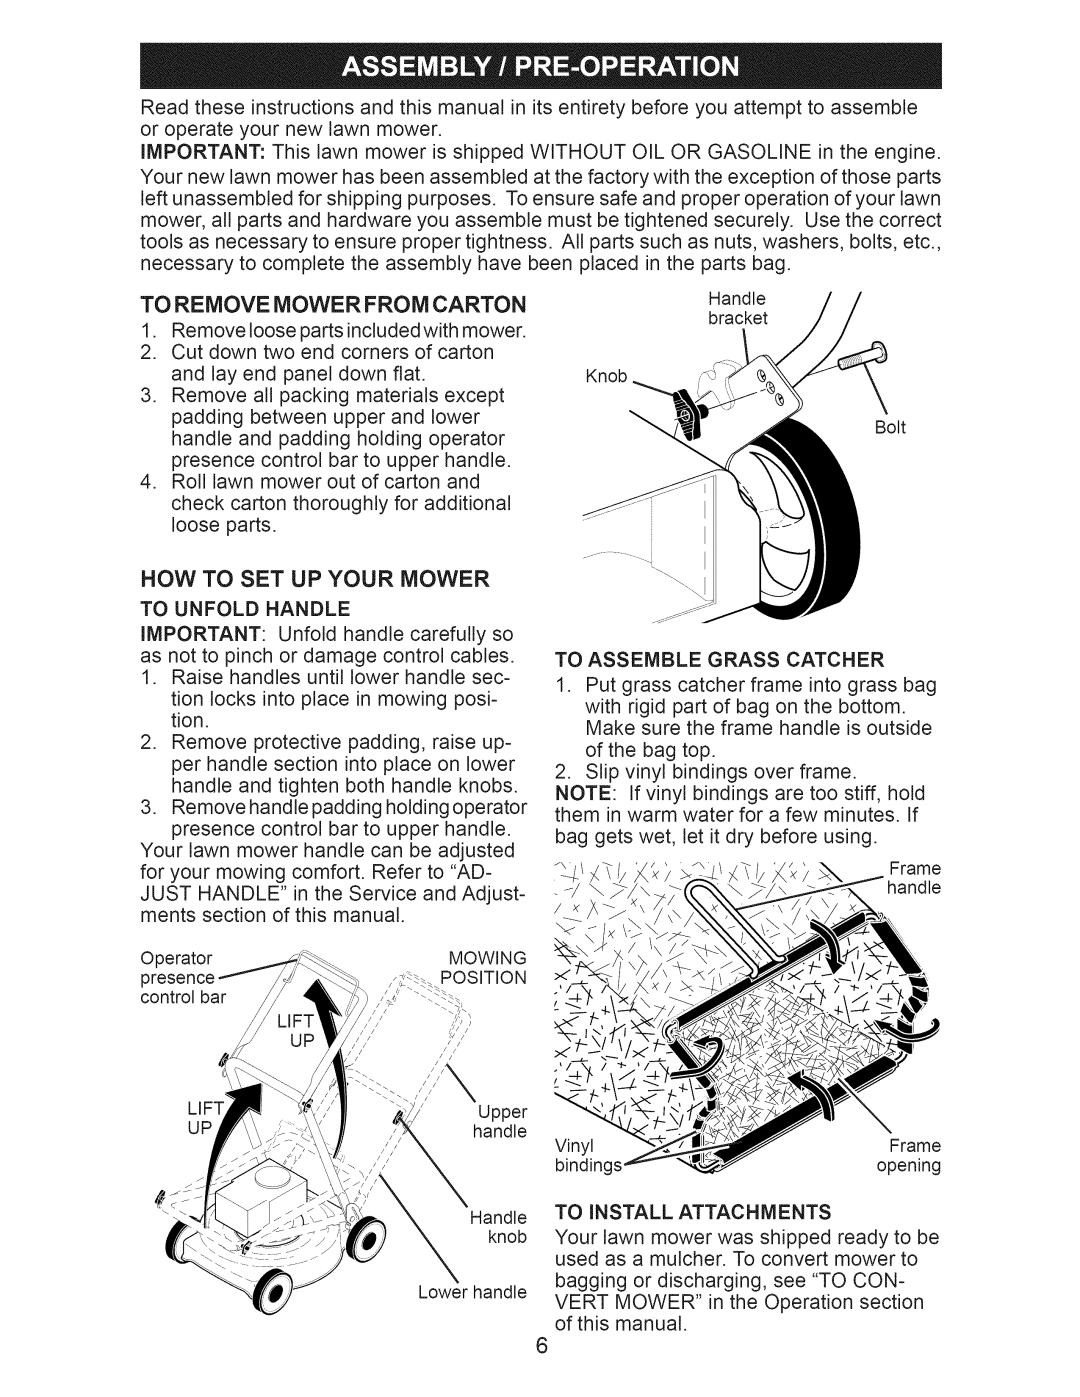 Craftsman 917.374351 manual To Remove Mower From Carton, Now To Set Up Your Mower 